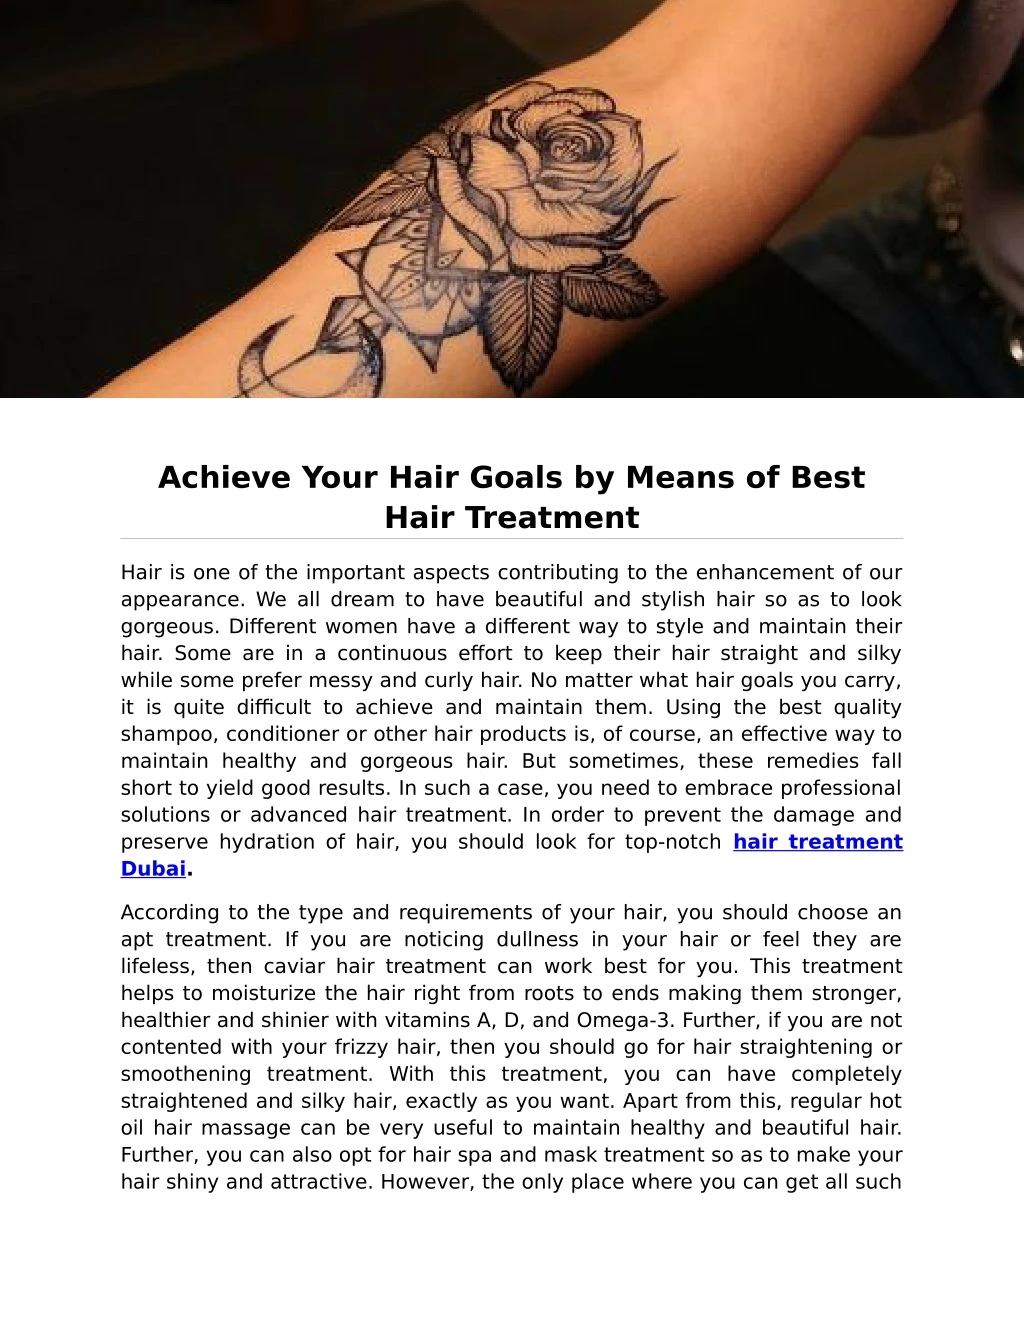 achieve your hair goals by means of best hair